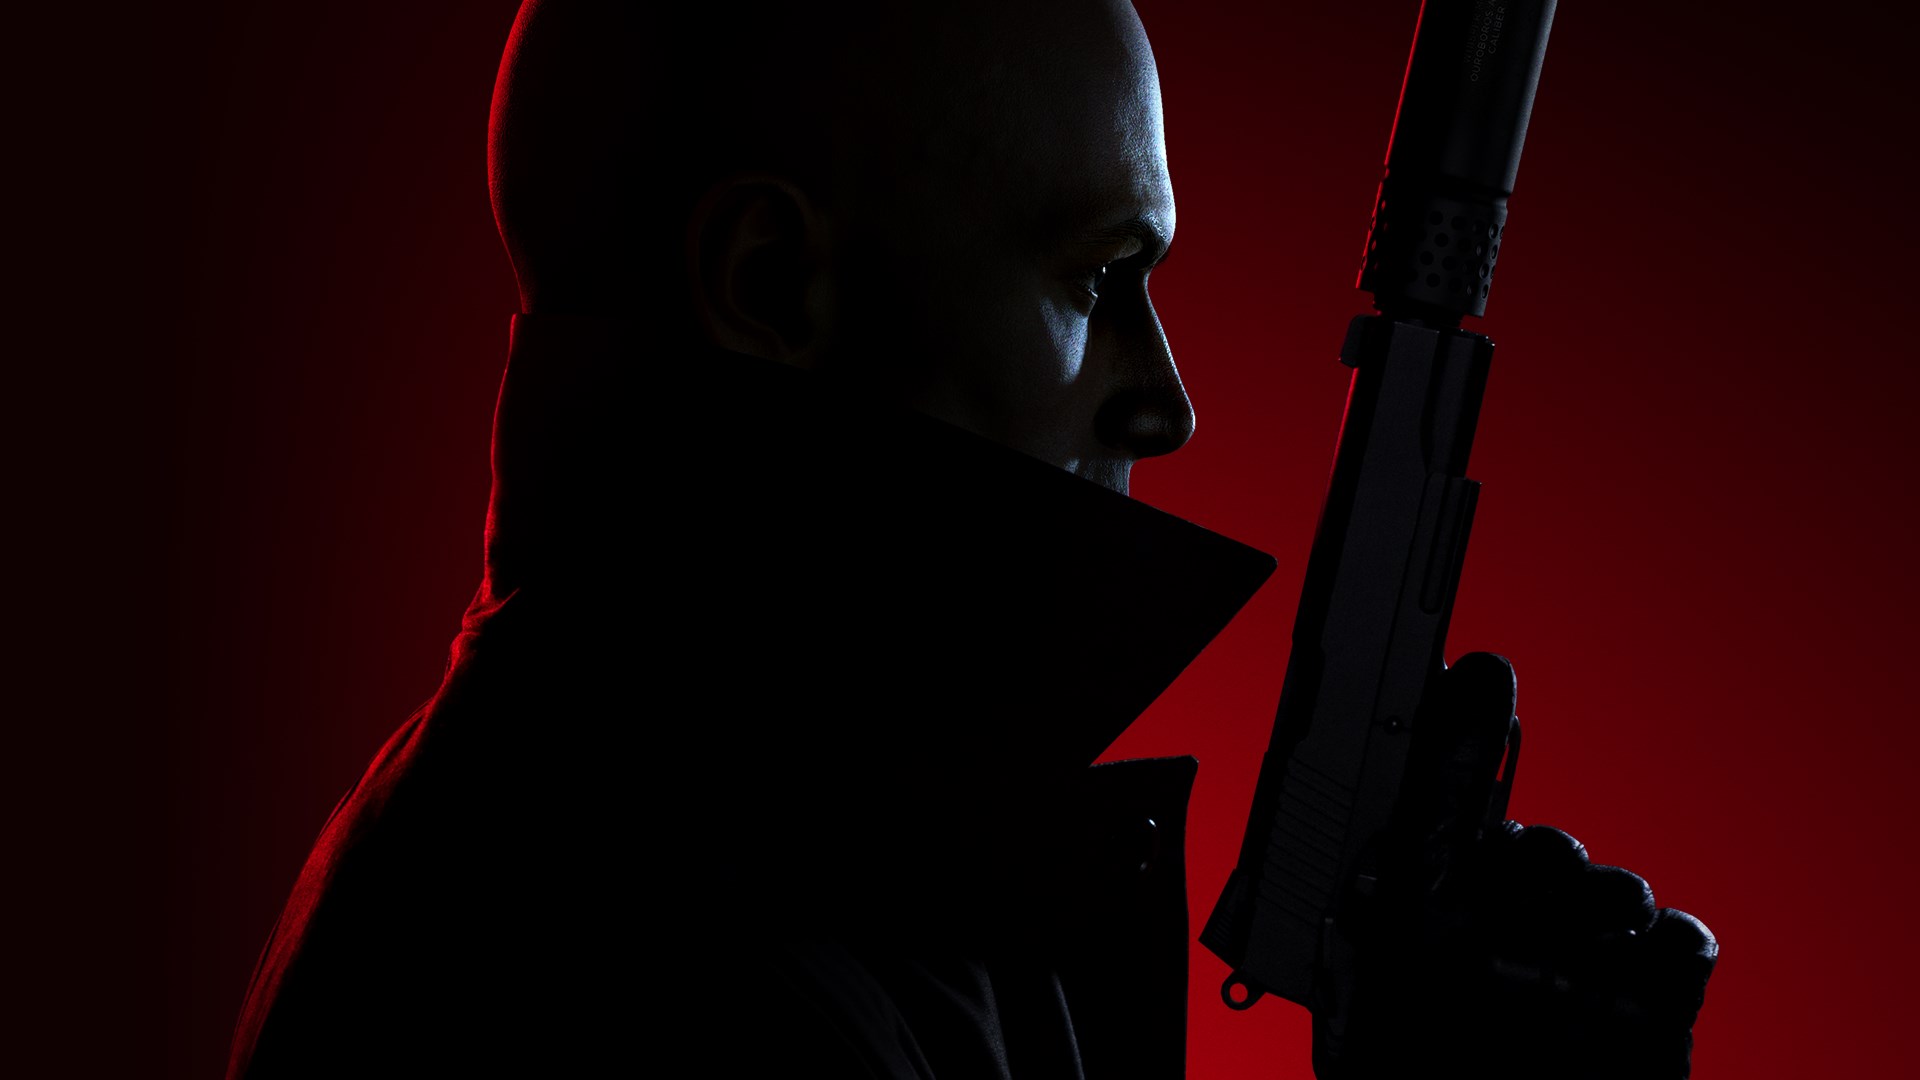 IO Interactive’s Hitman Trilogy Arrives on Game Pass Next Week, Alongside Other Platforms